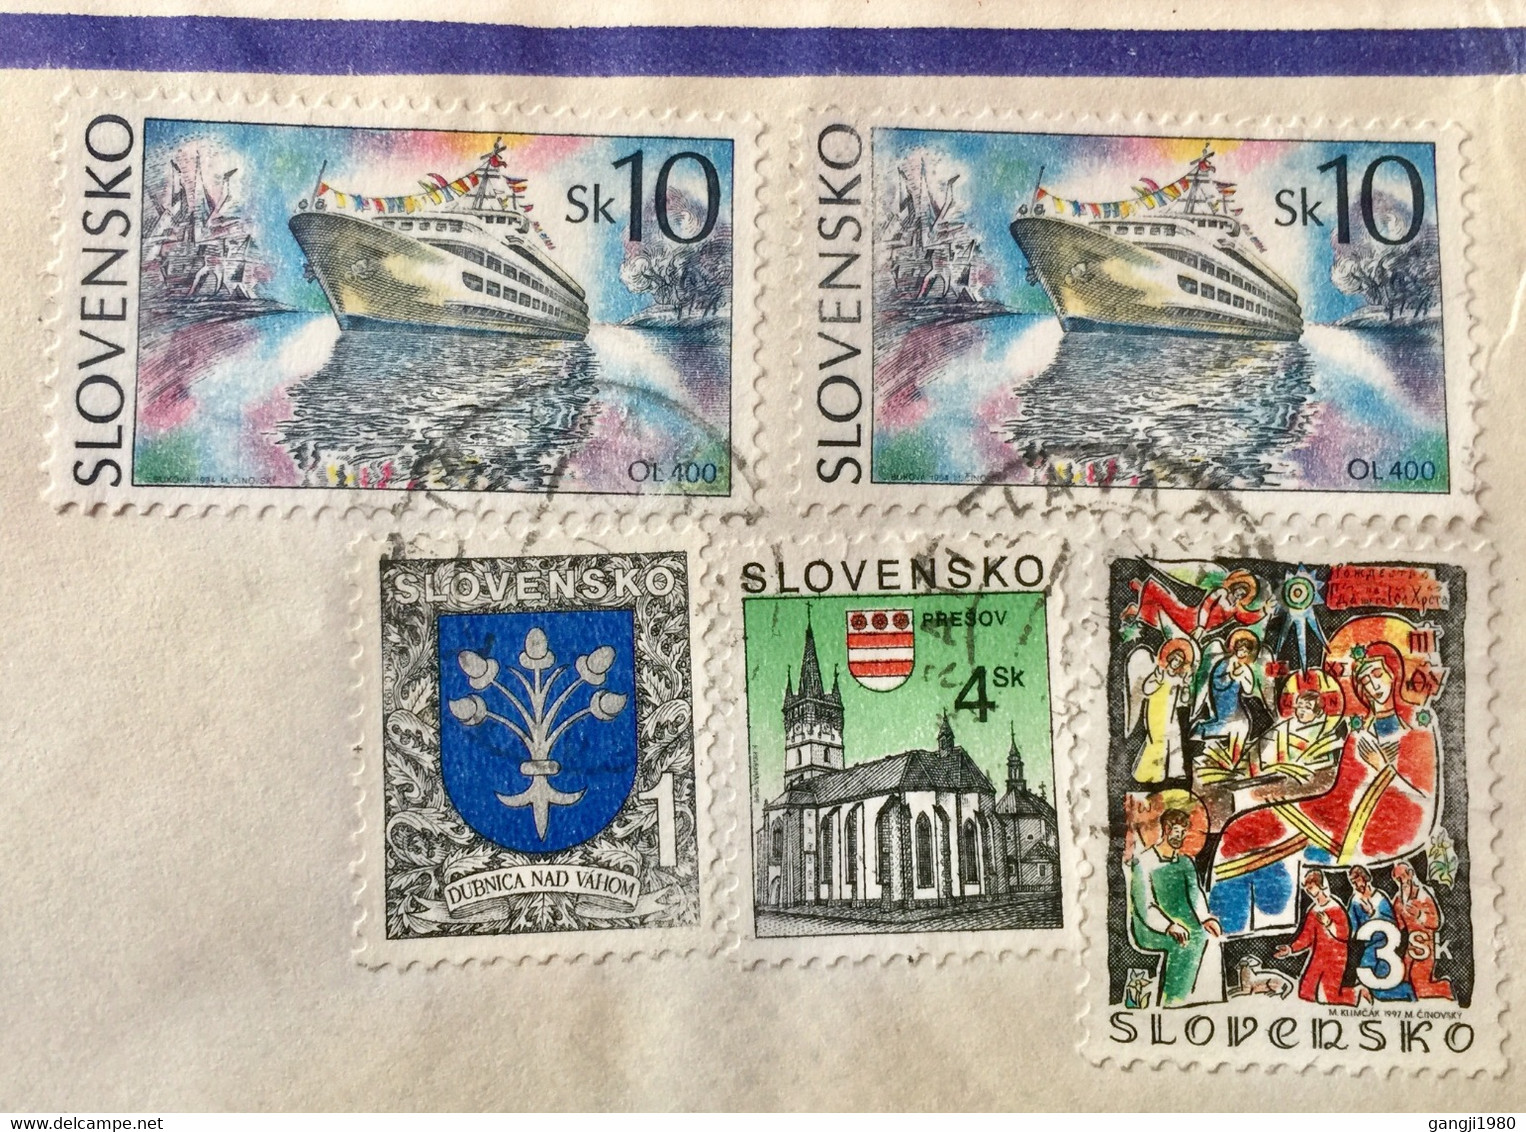 SLOVAKIA 2005, USED AIRMAIL COVER TO INDIA ,5 STAMPS 38SK RATE !SHIP, PRESOV,BUILDING,CHURCH,FAIRYTALES,ART ,PAINTING - Storia Postale